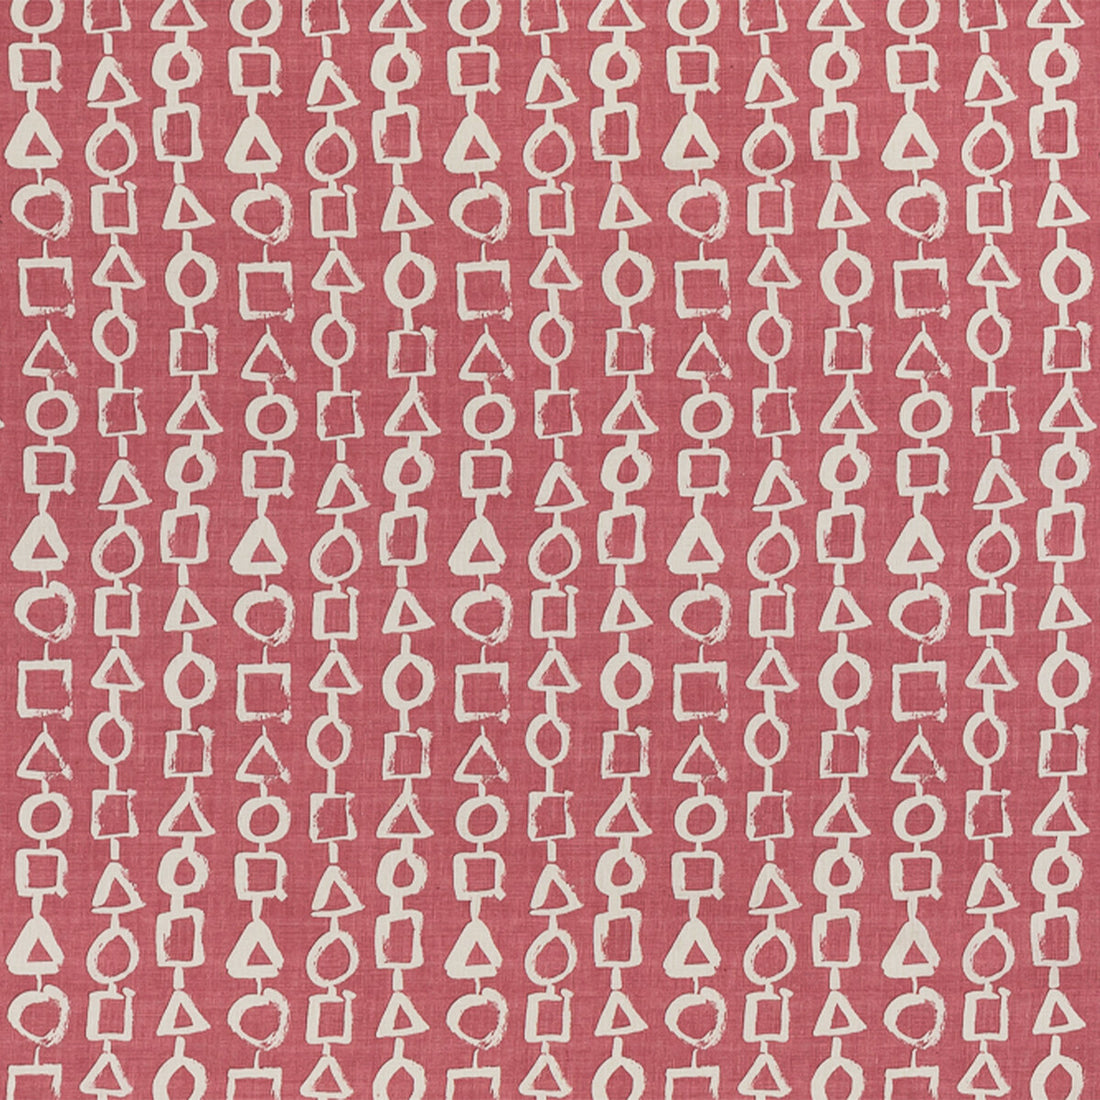 Bancroft fabric in raspberry color - pattern BFC-3695.97.0 - by Lee Jofa in the Blithfield collection